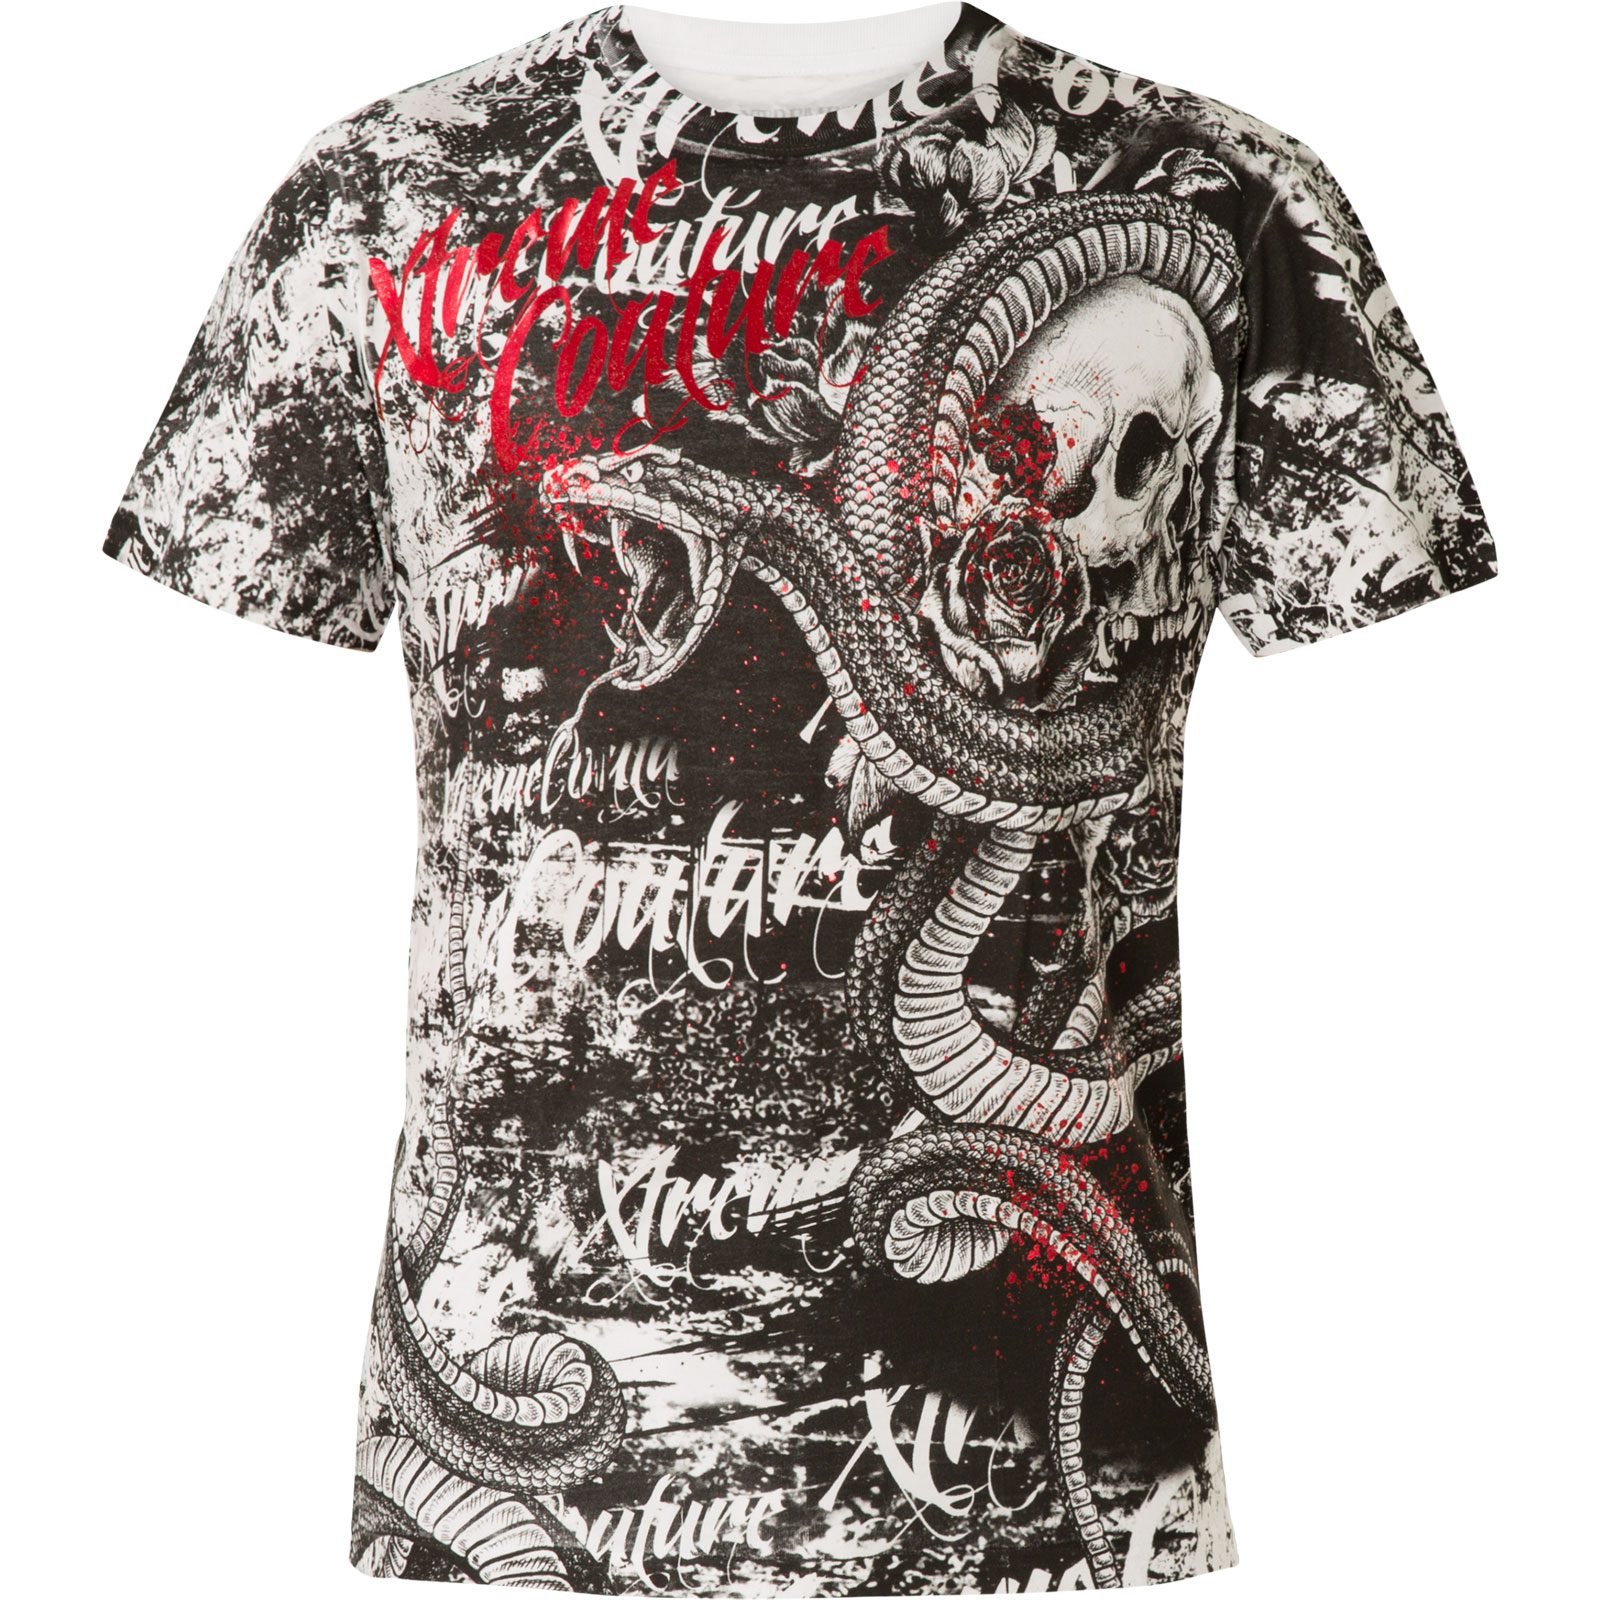 Xtreme Couture T- Shirt Blacktooth Grin with a snake and skull